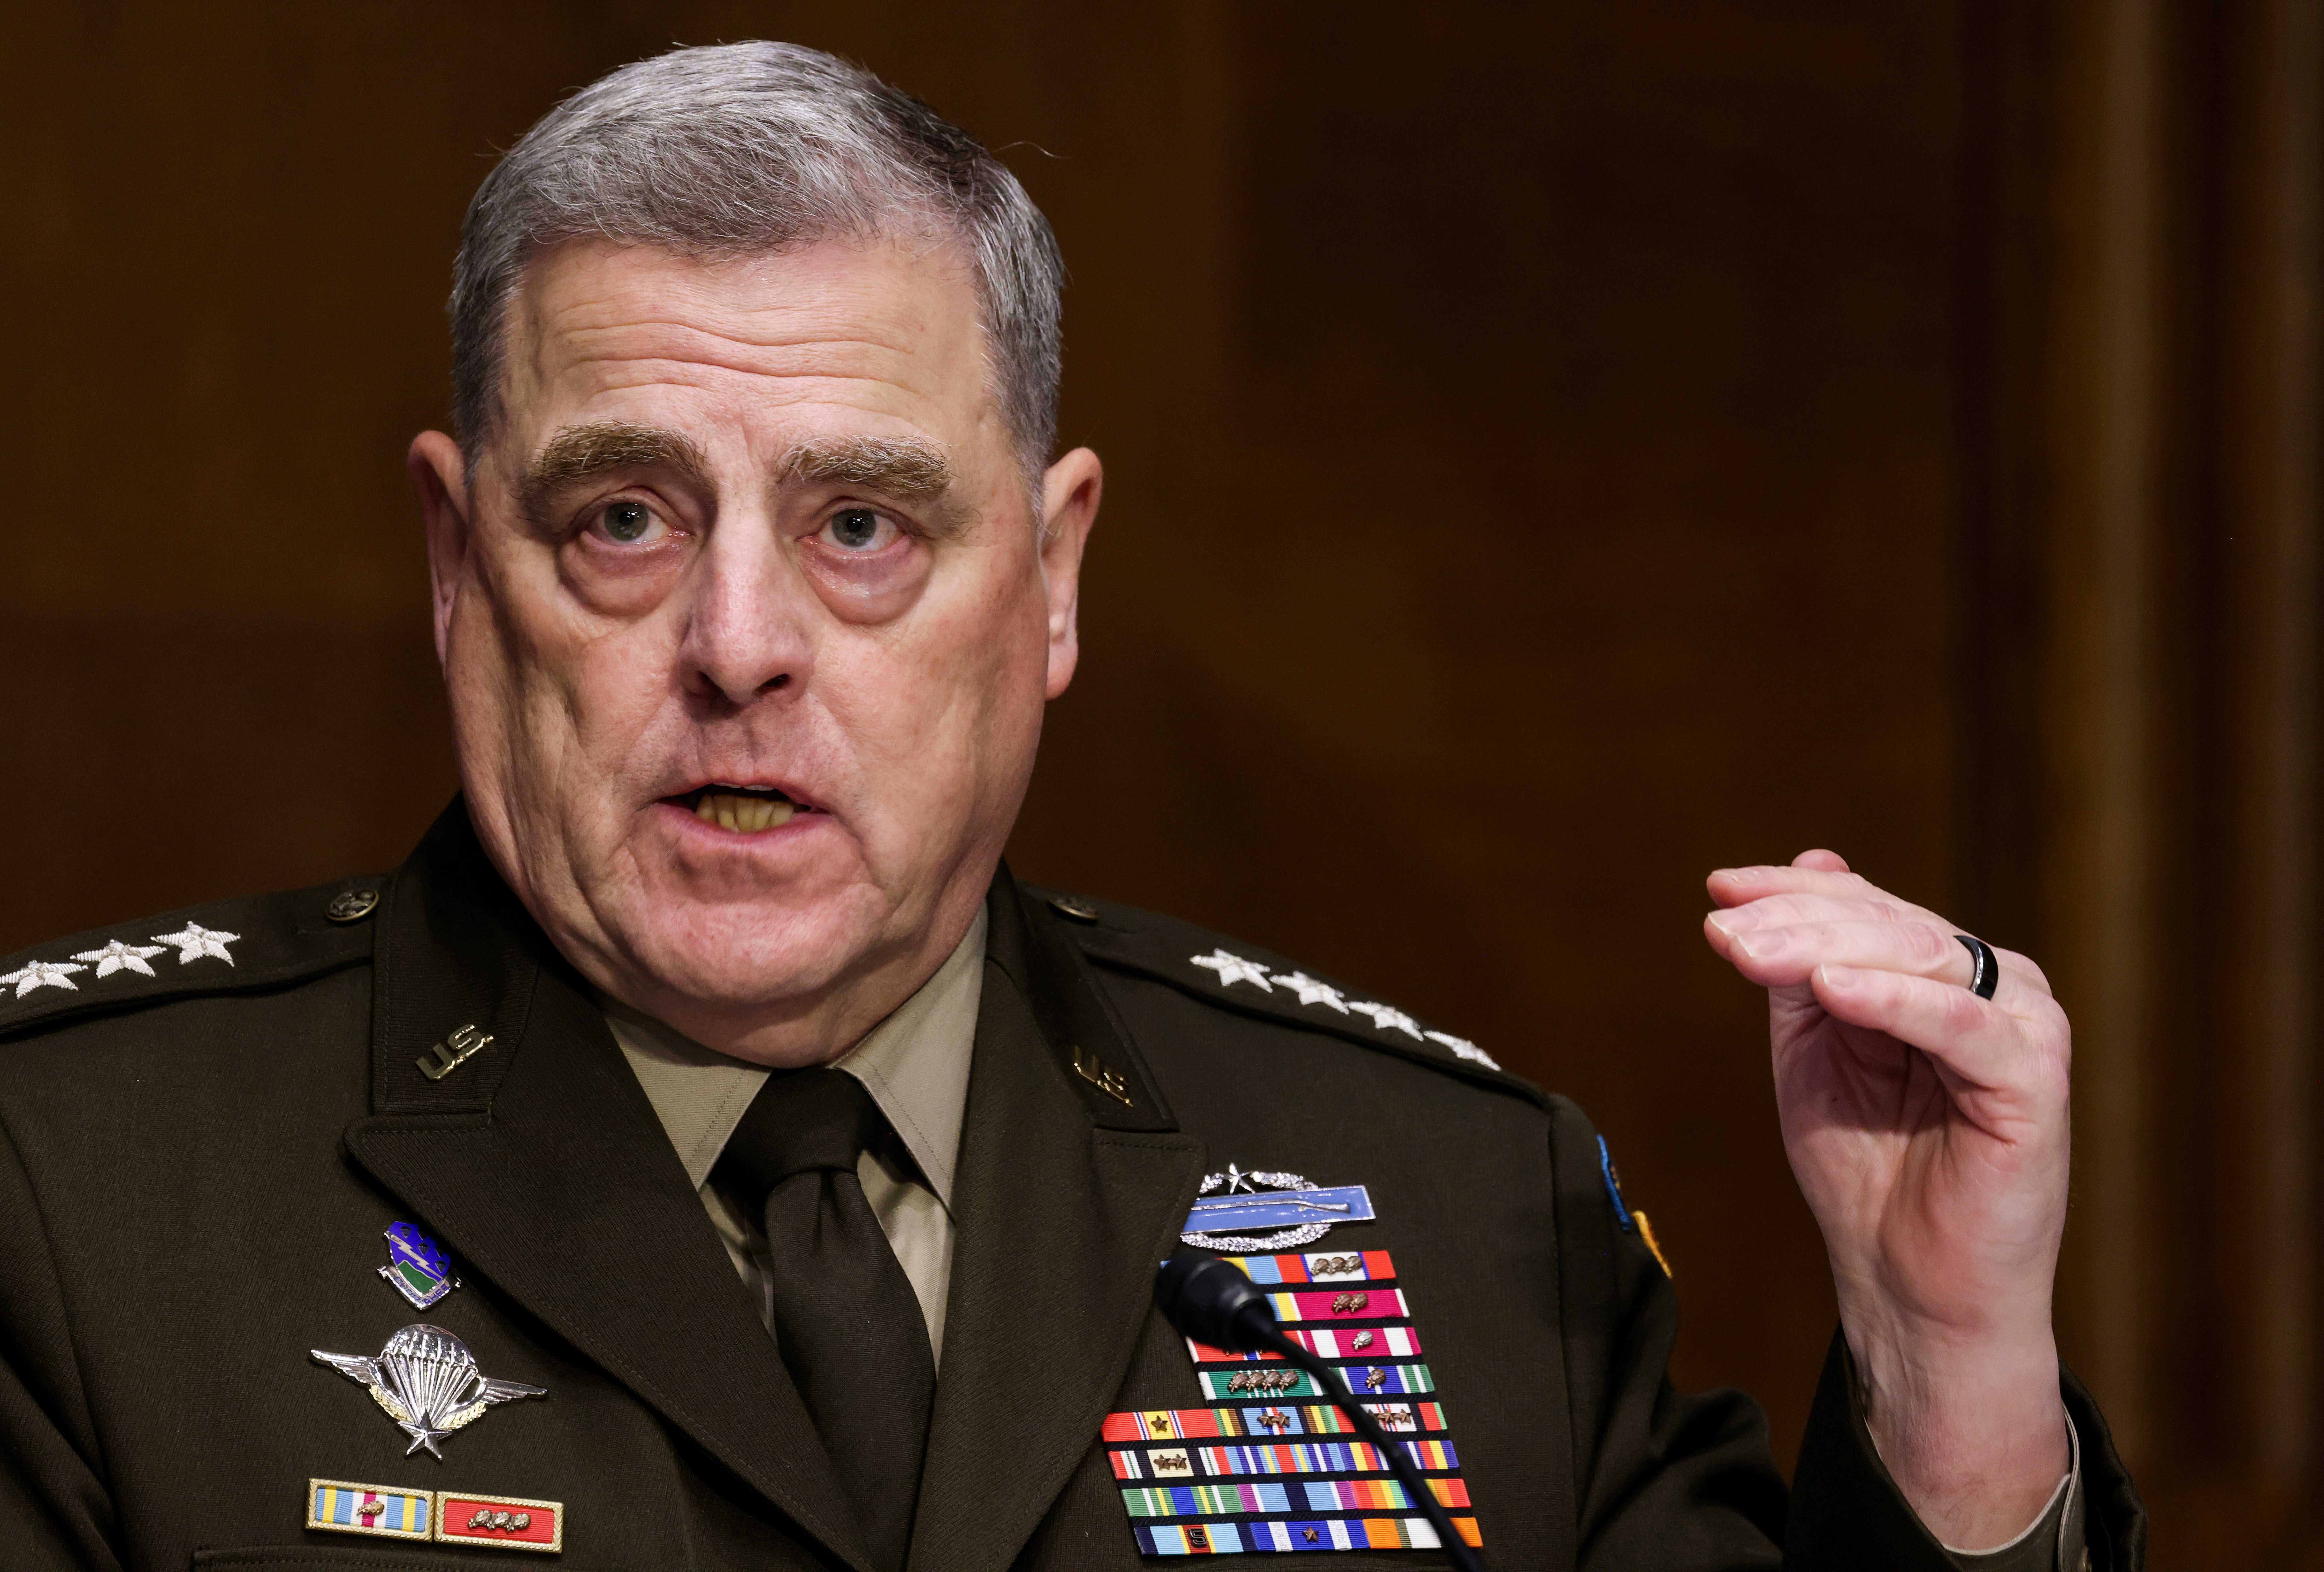 Joint Chiefs of Staff Chair Gen Mark Milley testifies on the Defense Department’s budget request during a Senate Appropriations Committee hearing on Capitol Hill on 17 June, 2021 in Washington, DC. Mr Milley repeatedly rebuffed calls from former President Donald Trump and associates for violent military intervention in protests last year, a new book claims.